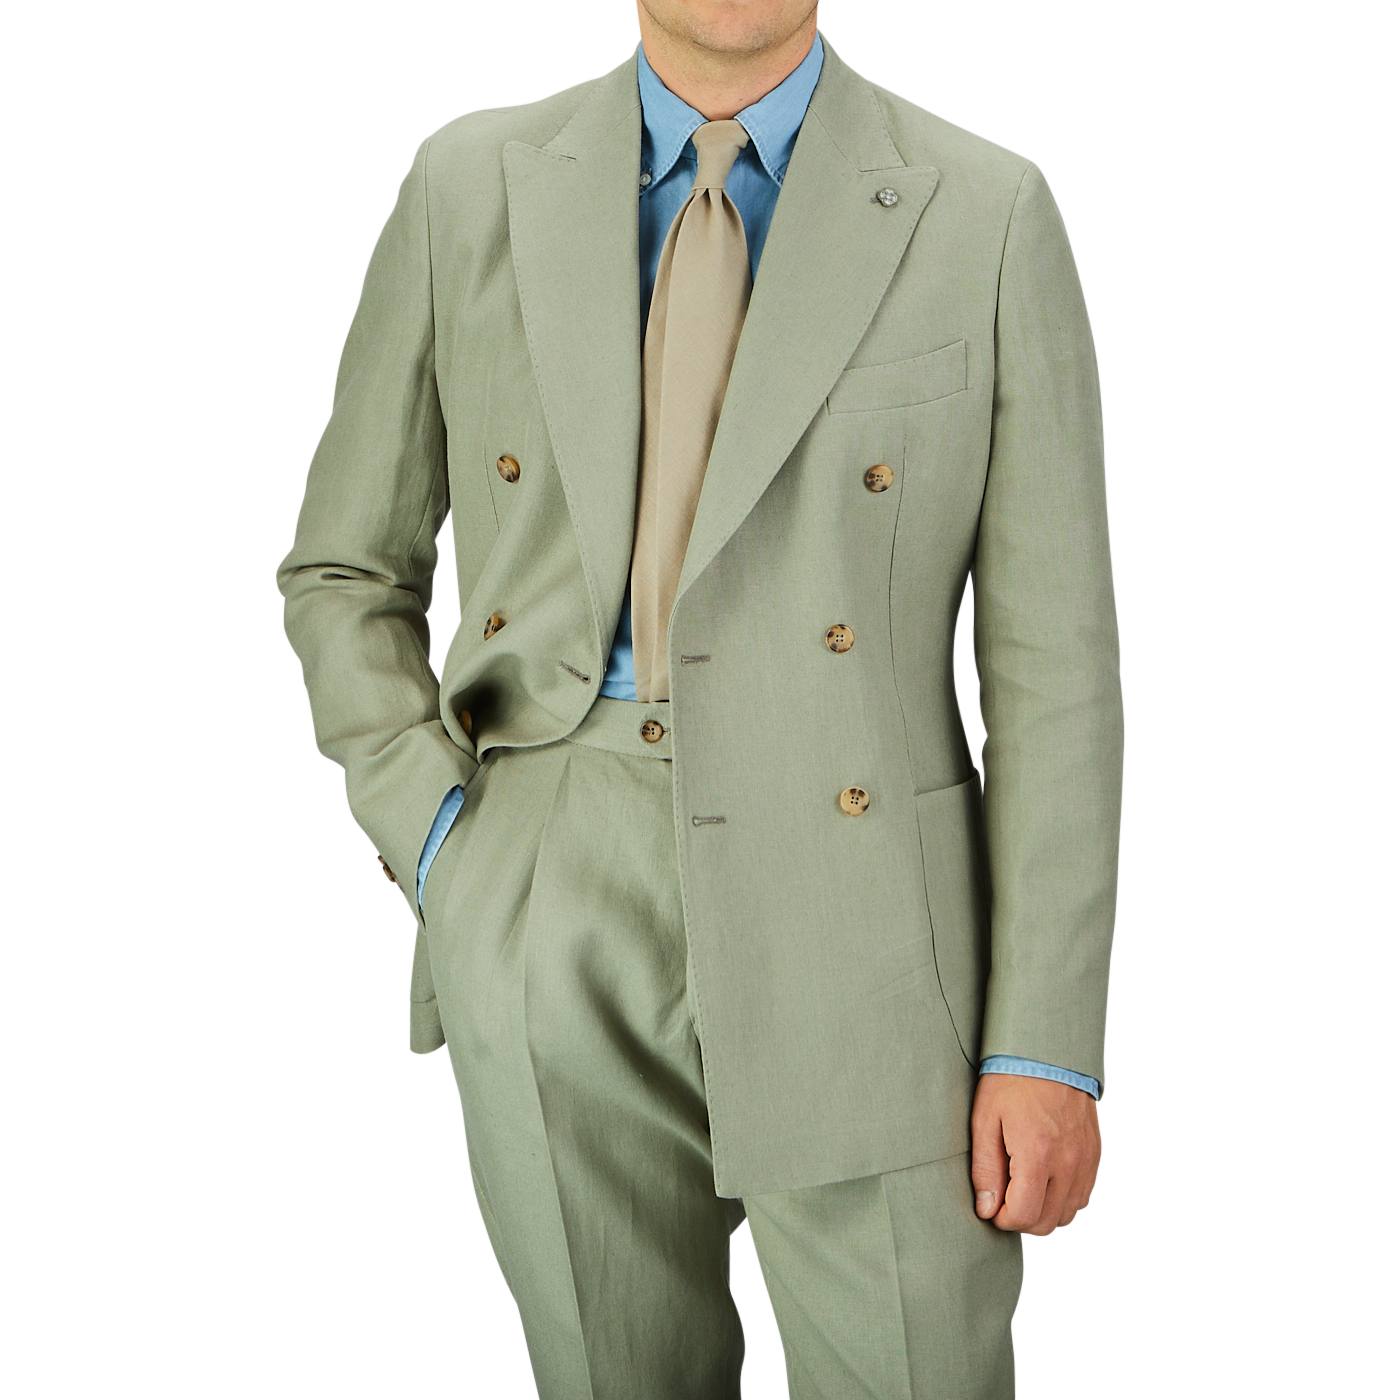 A person wearing a Sage Green Canapa Hemp DB Suit by Studio 73 with a light blue shirt and a beige tie stands with one hand in the pocket.